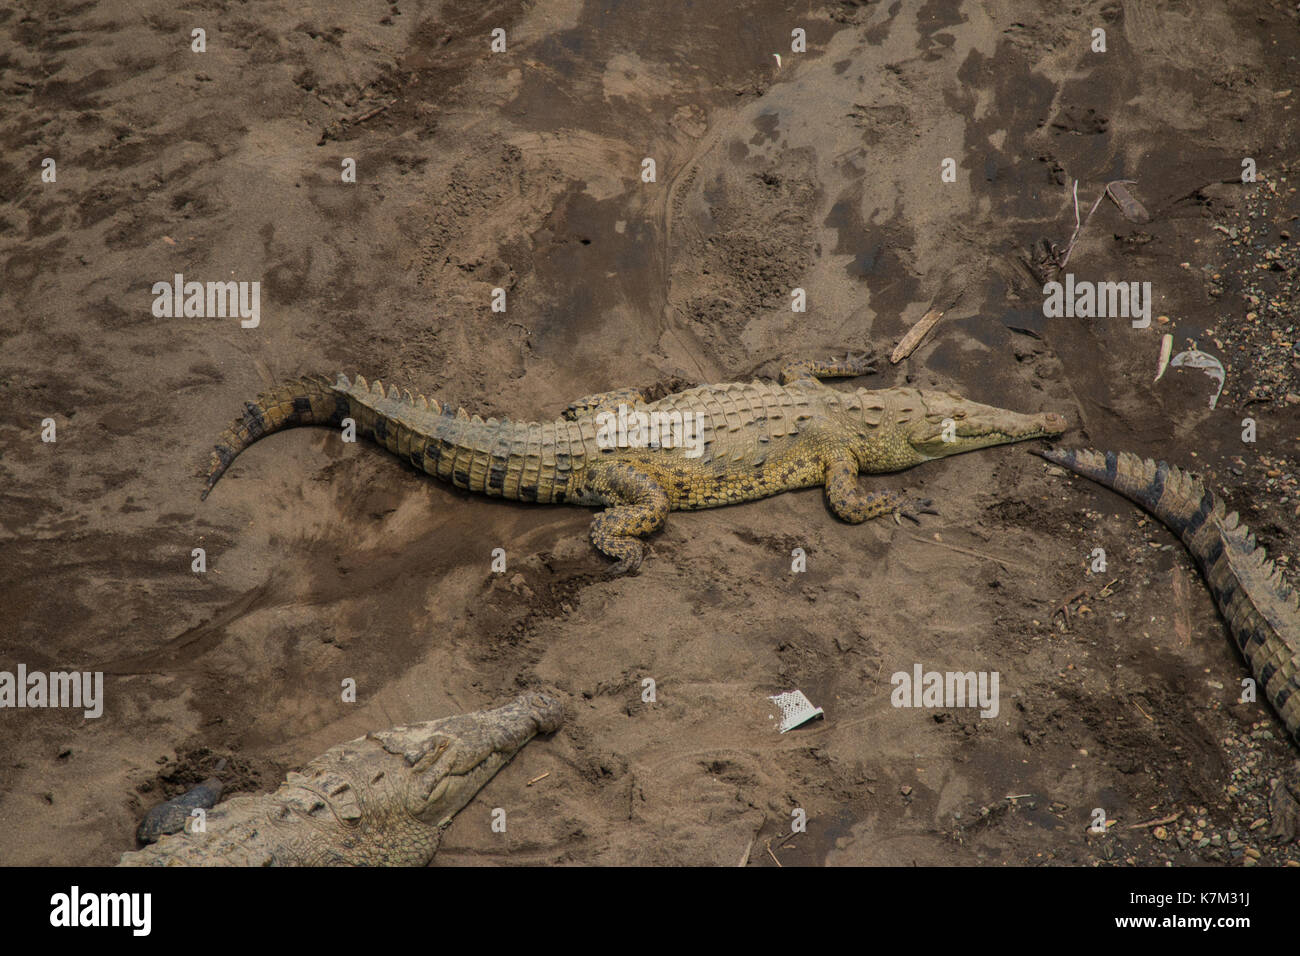 Crocodiles Resting on a River Bank Stock Photo